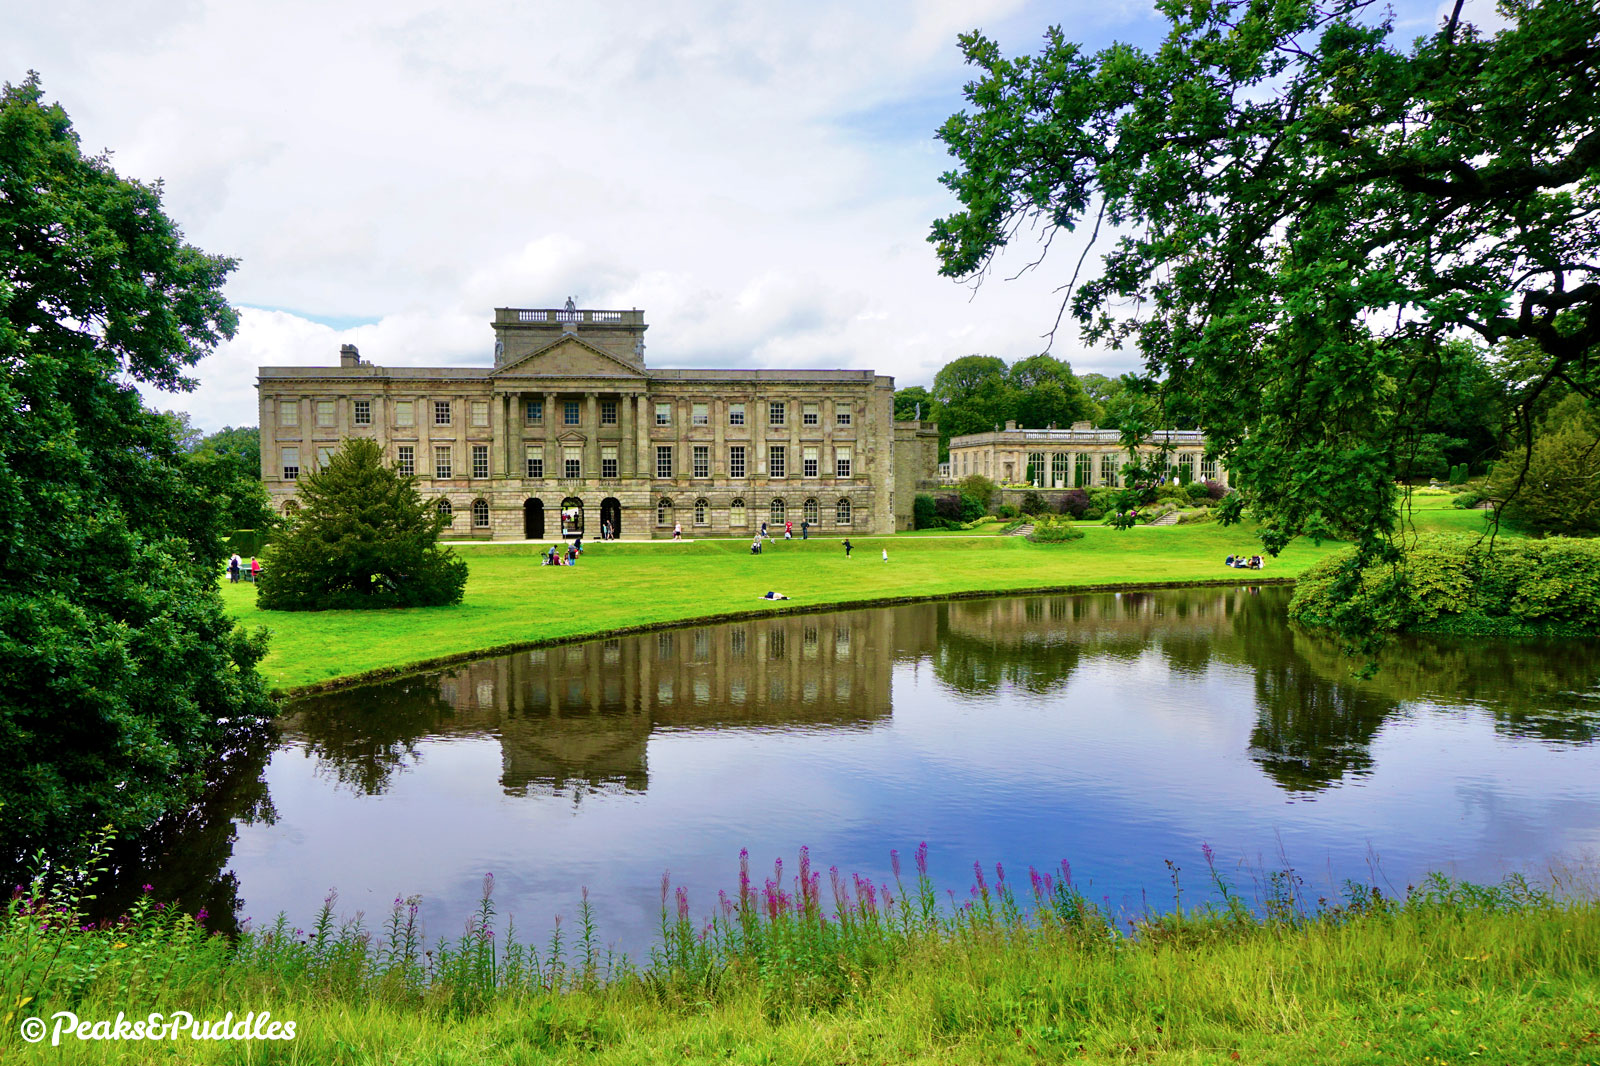 Lyme Hall and its Orangery seen from across the famous pond in its landscaped gardens (entry fee required).